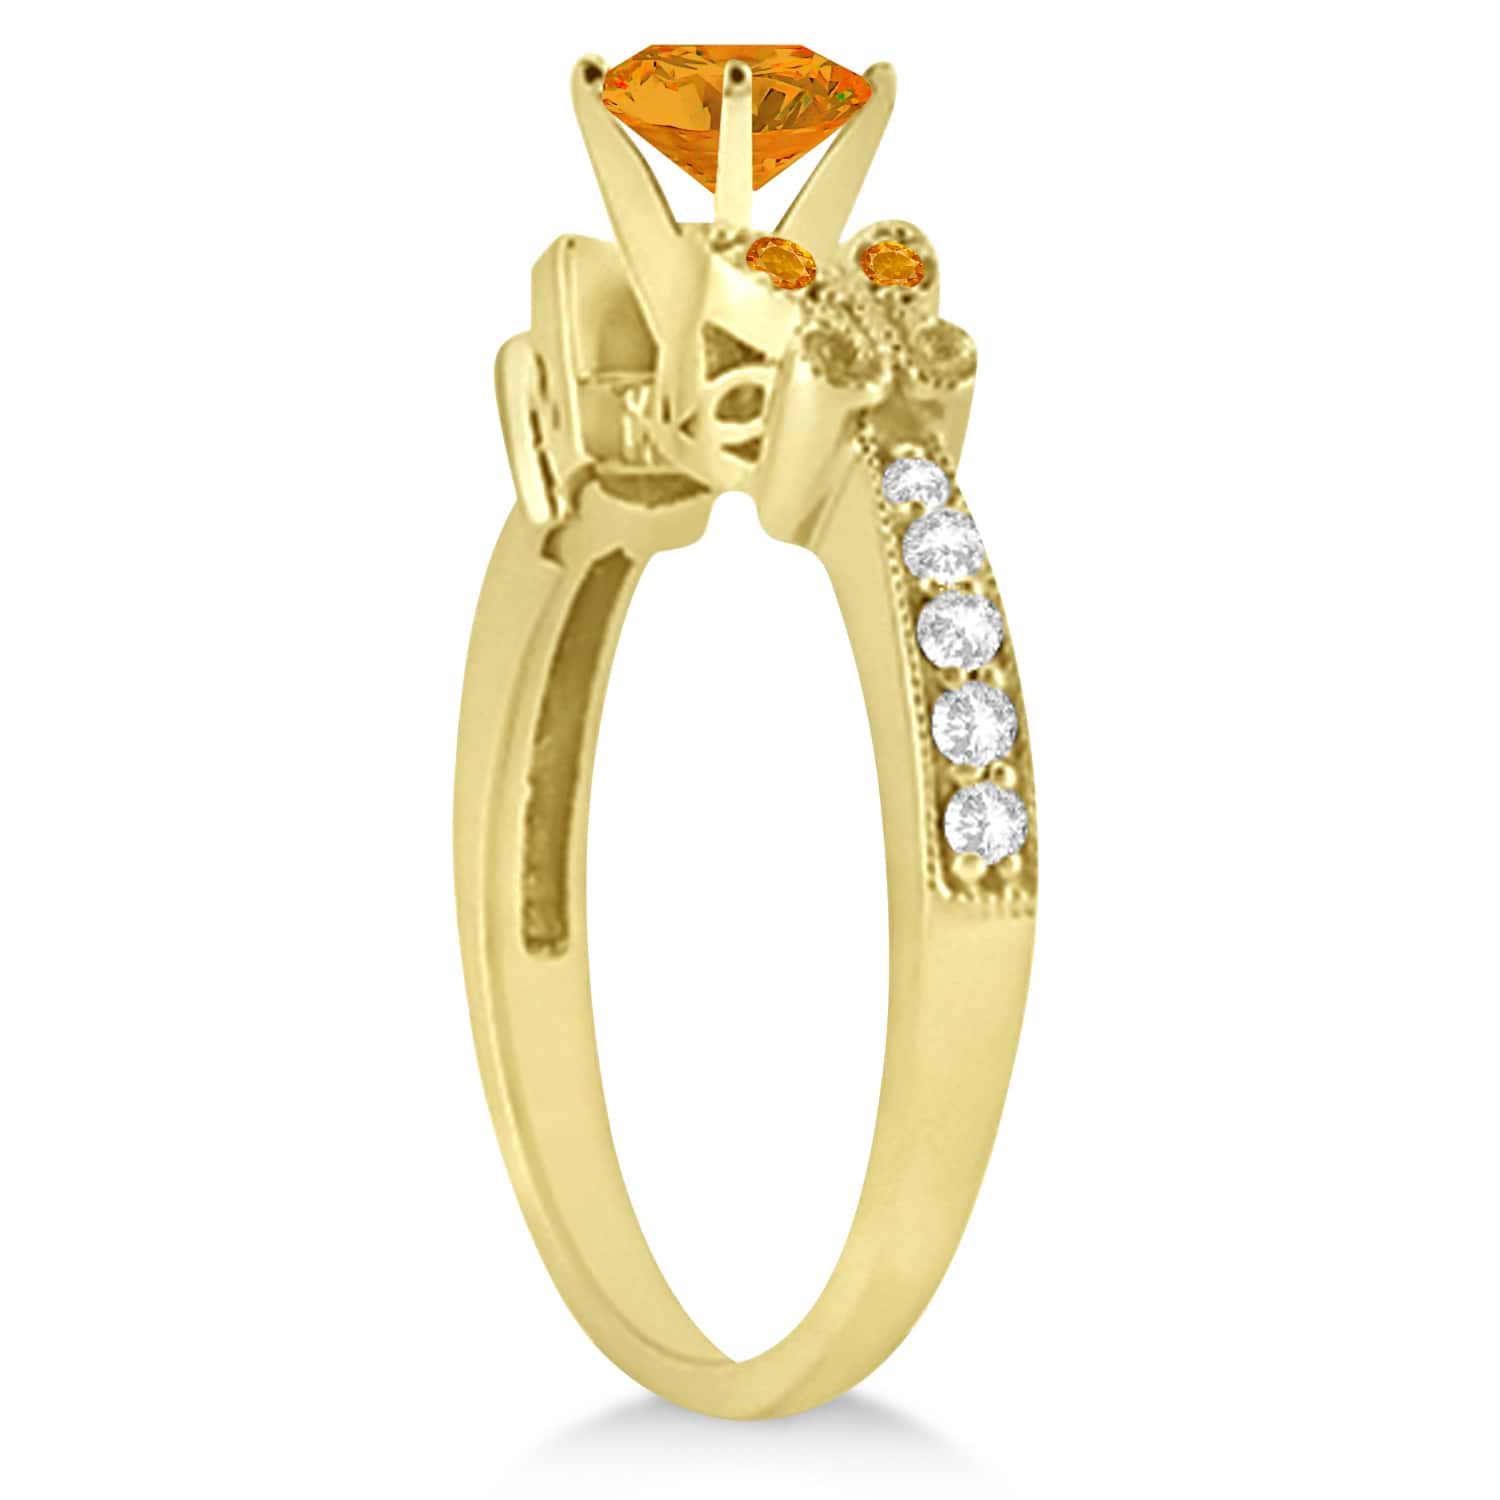 Butterfly Genuine Citrine & Diamond Engagement Ring 18K Yellow Gold 1.28ct